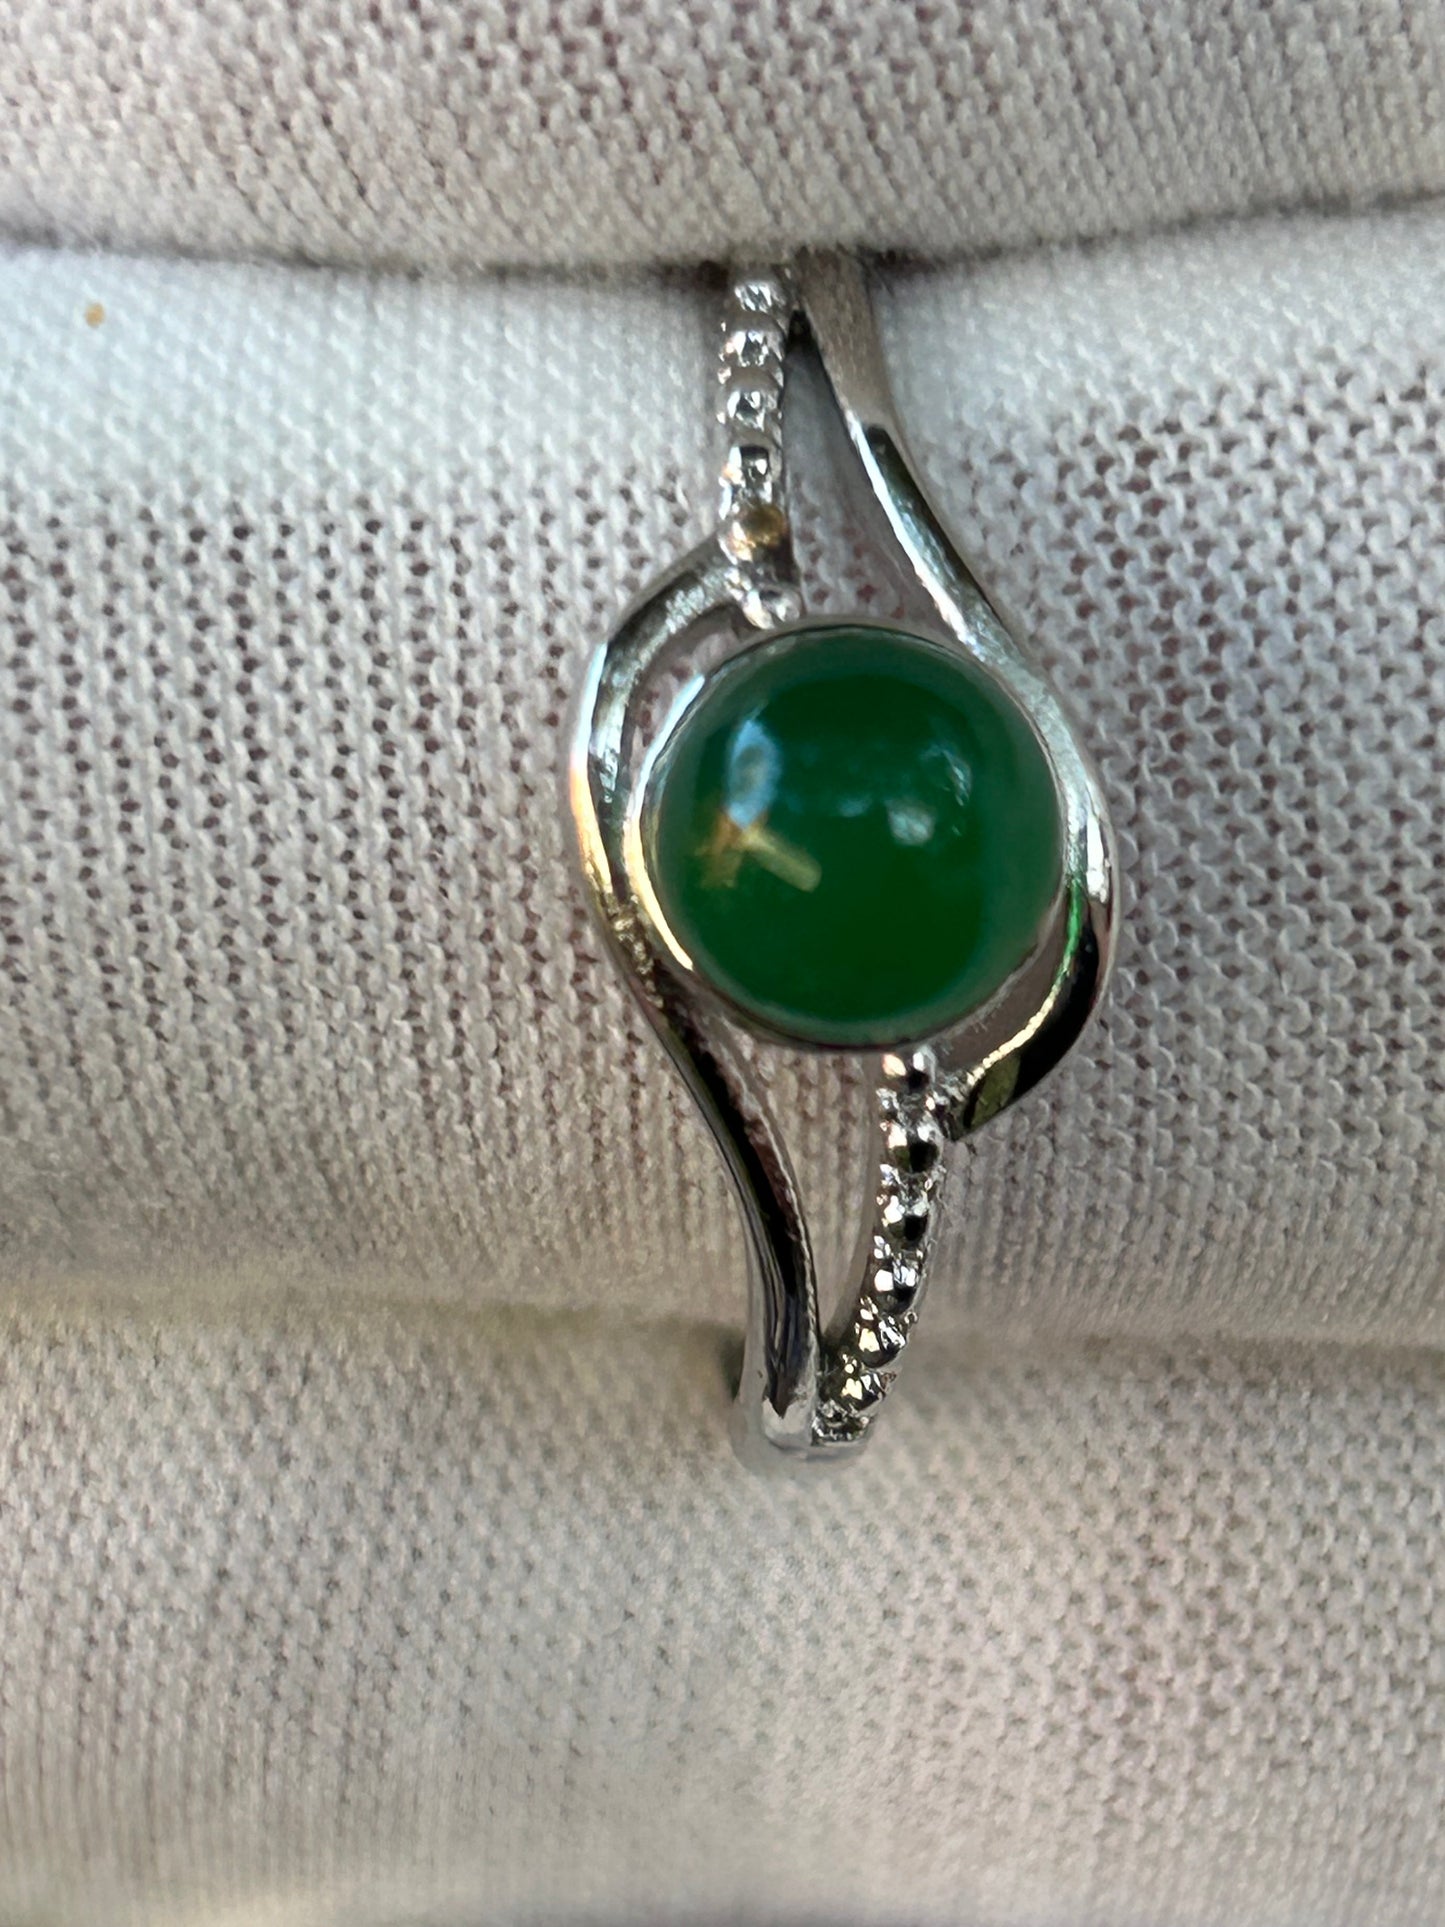 Delicate round polished green jade set in ornate adjustable silver ring